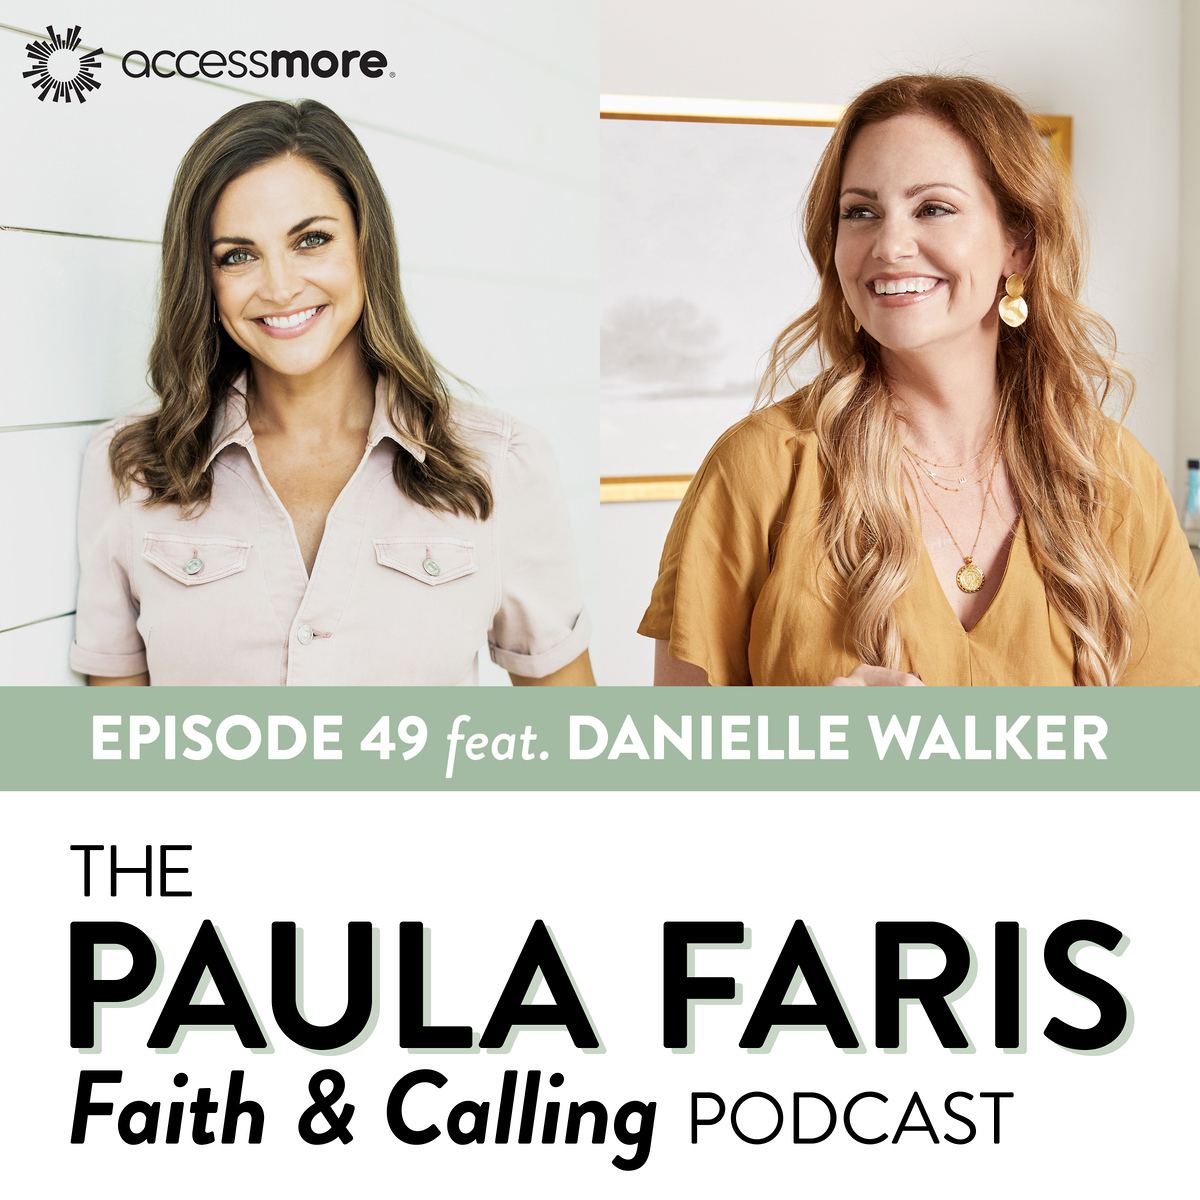 Ep 49 - Danielle Walker: Health, Hope and The Power of Good Food